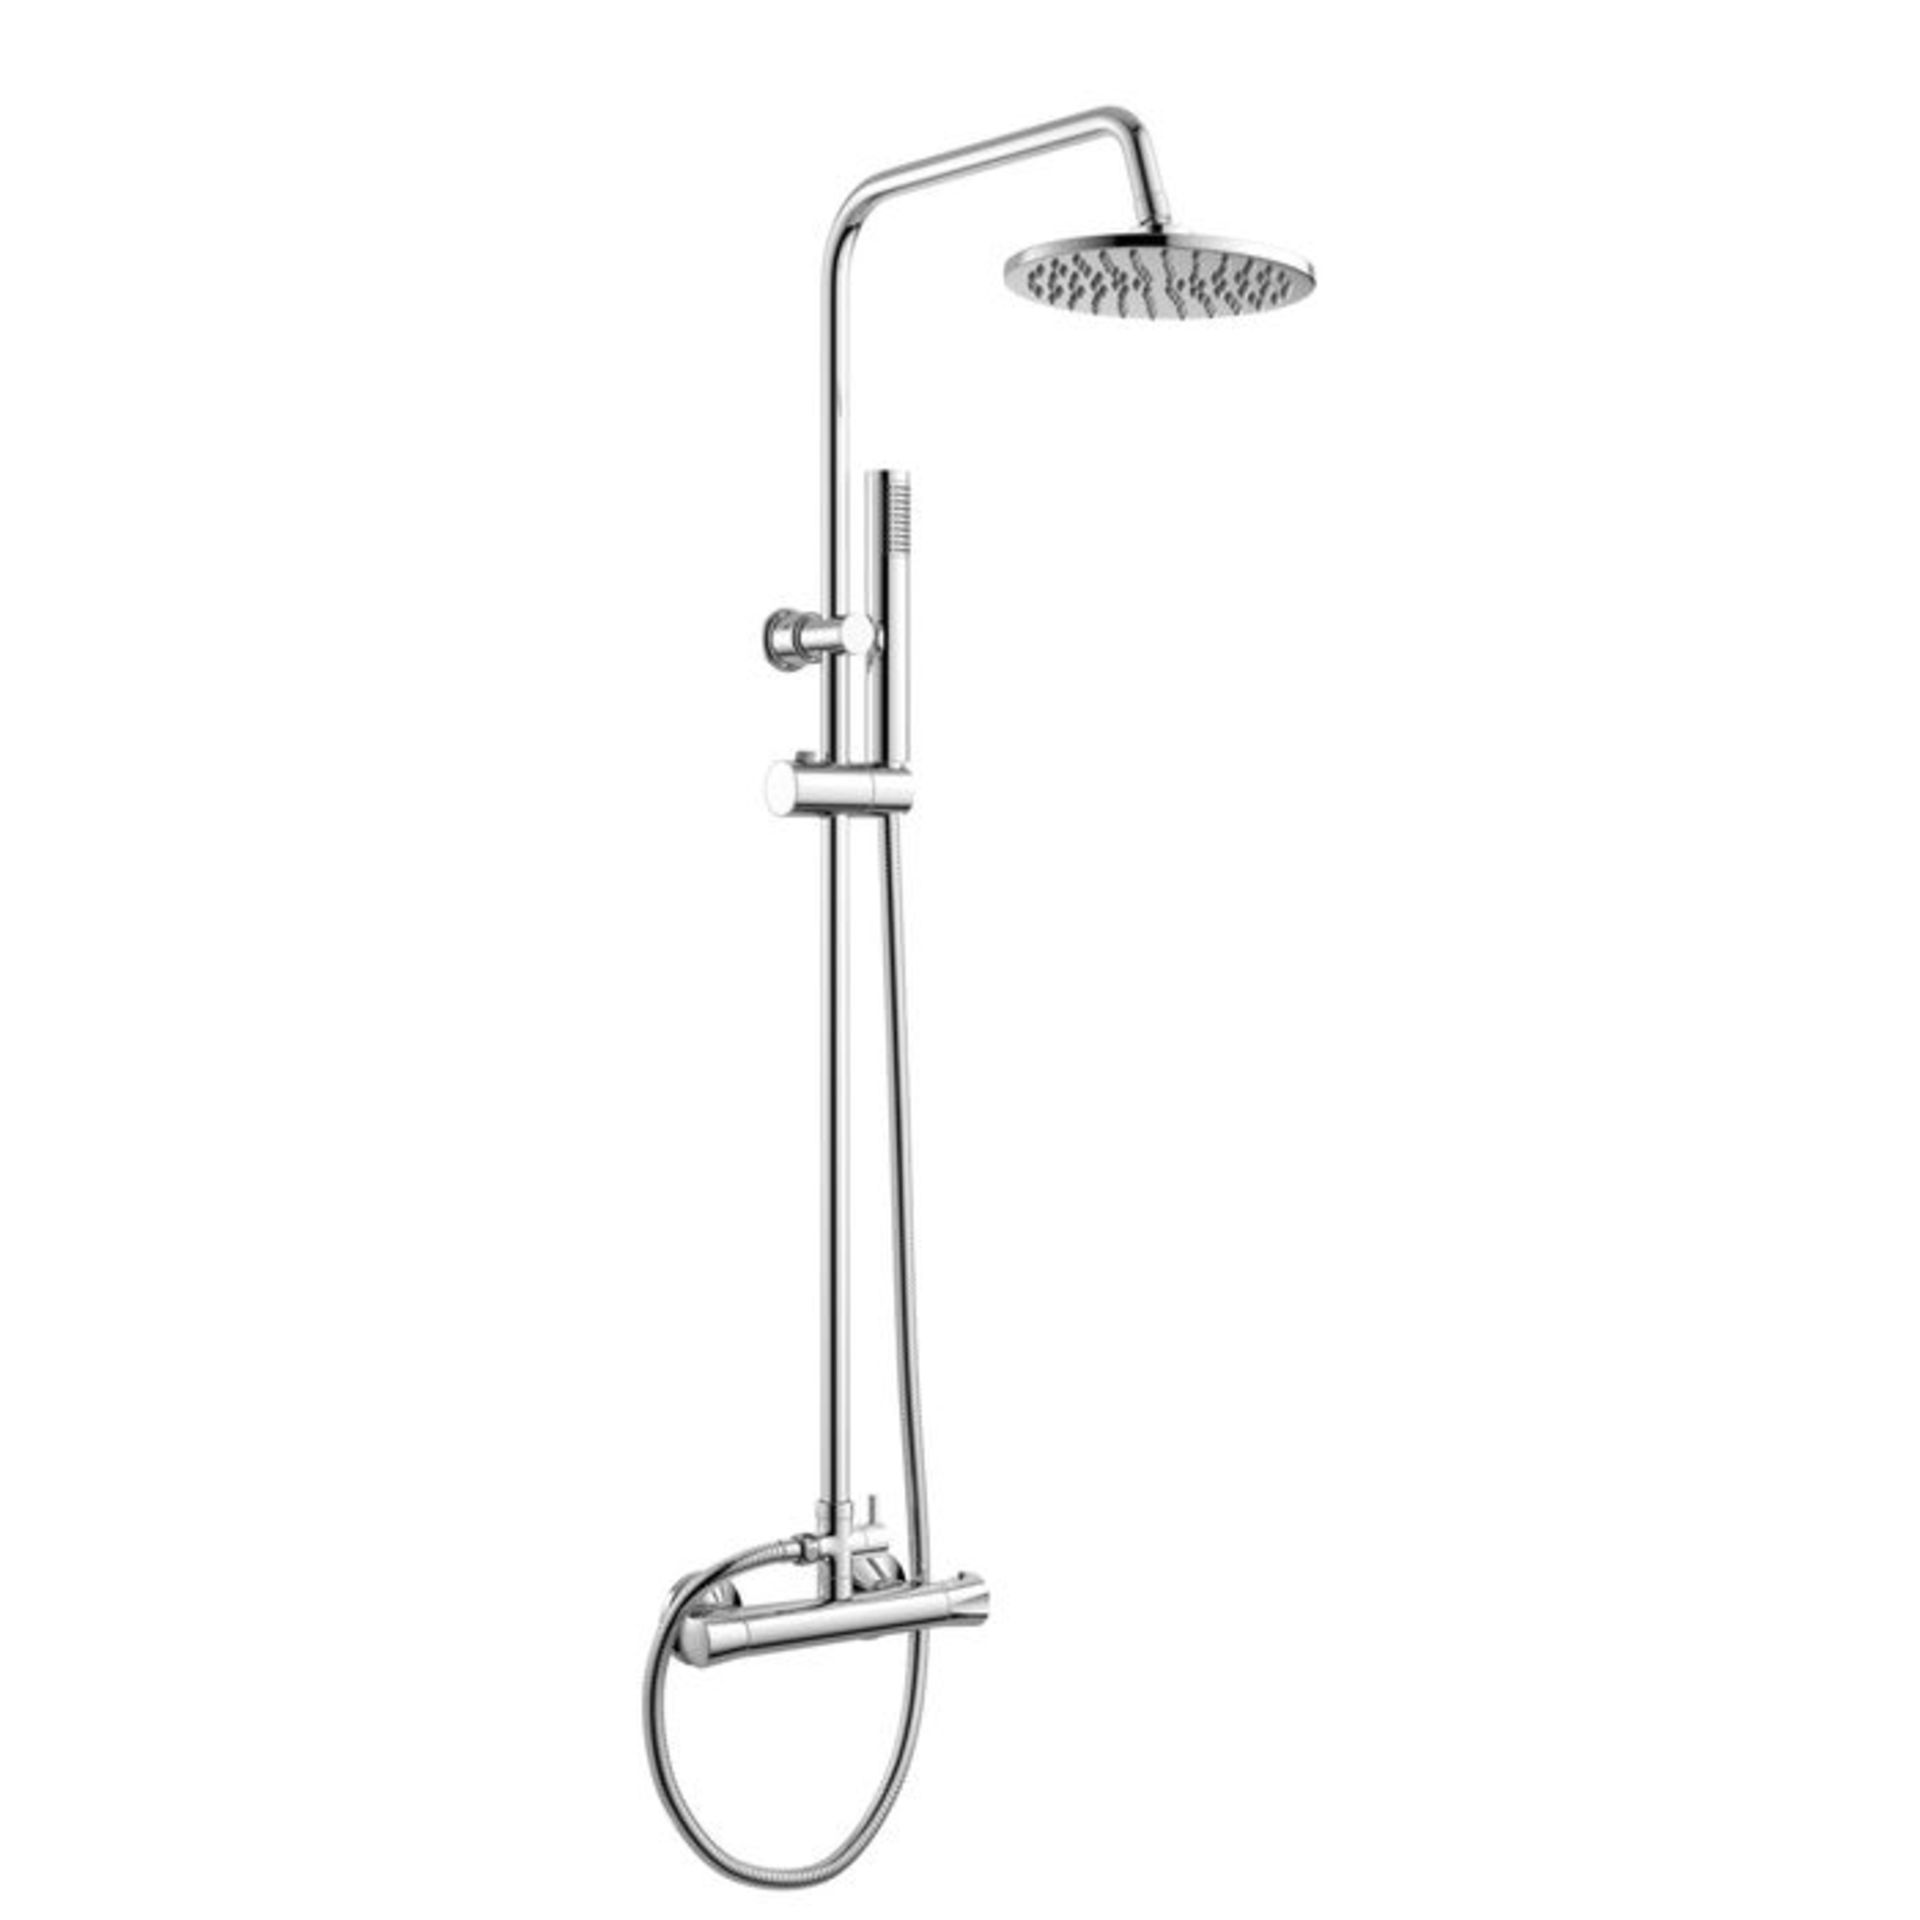 (PP152) Round Exposed Thermostatic Shower Kit & Head. Shower head features a tilt action for maximum